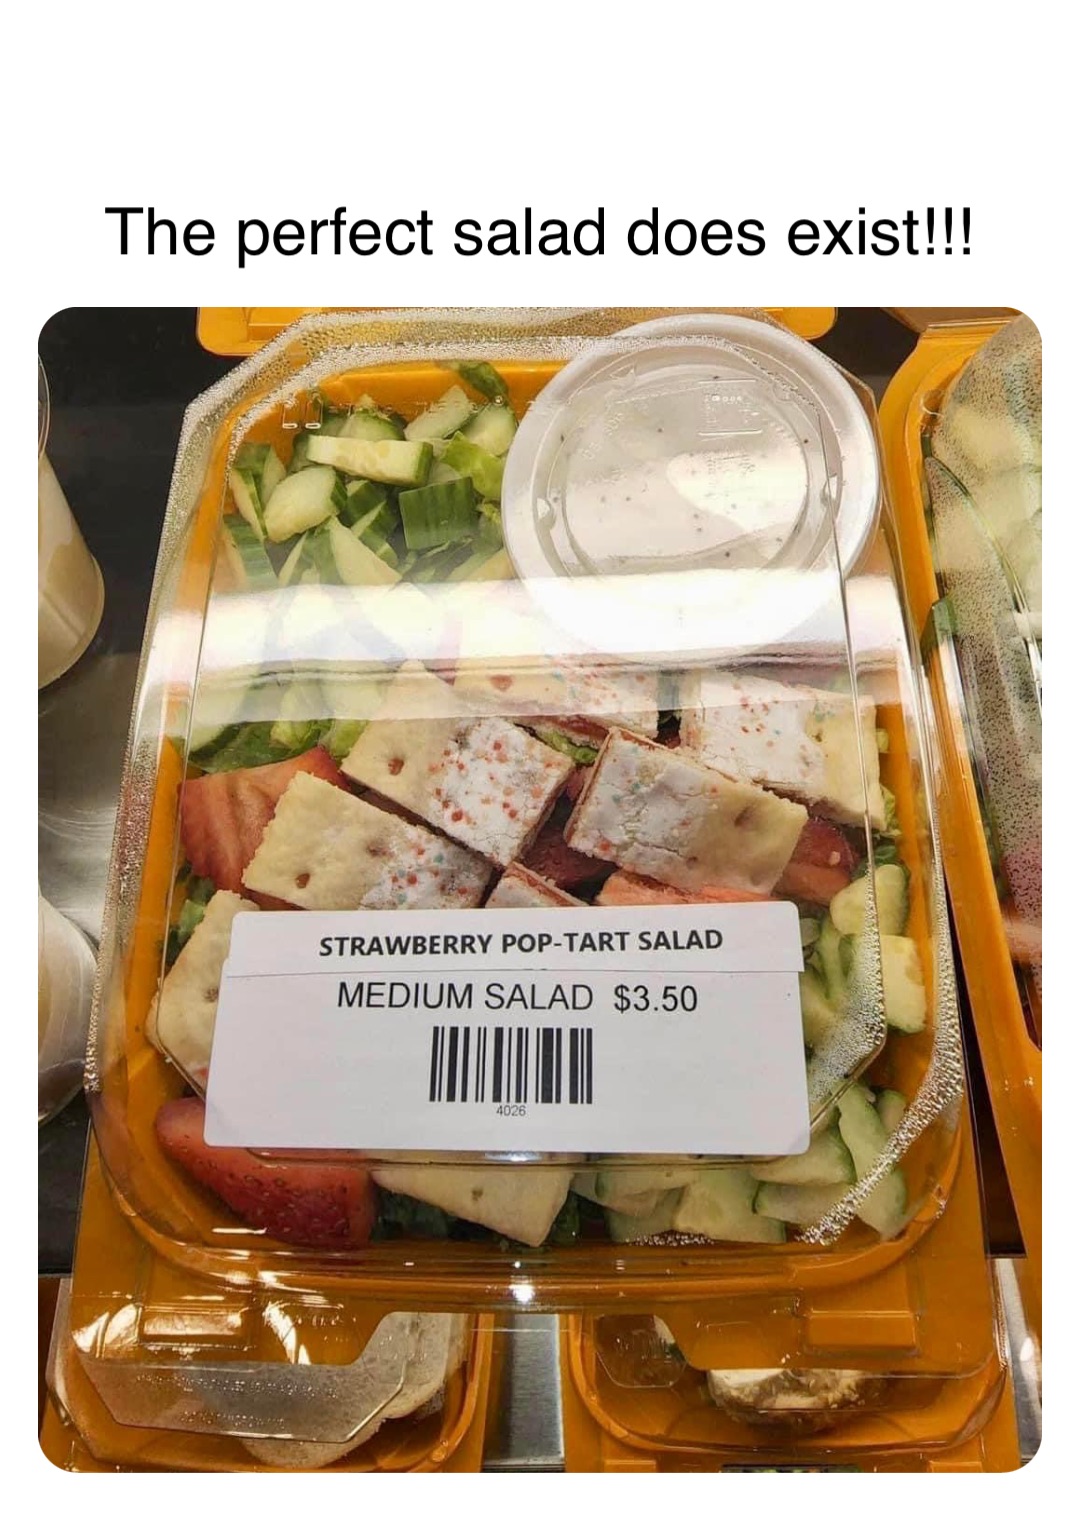 Double tap to edit The perfect salad does exist!!!